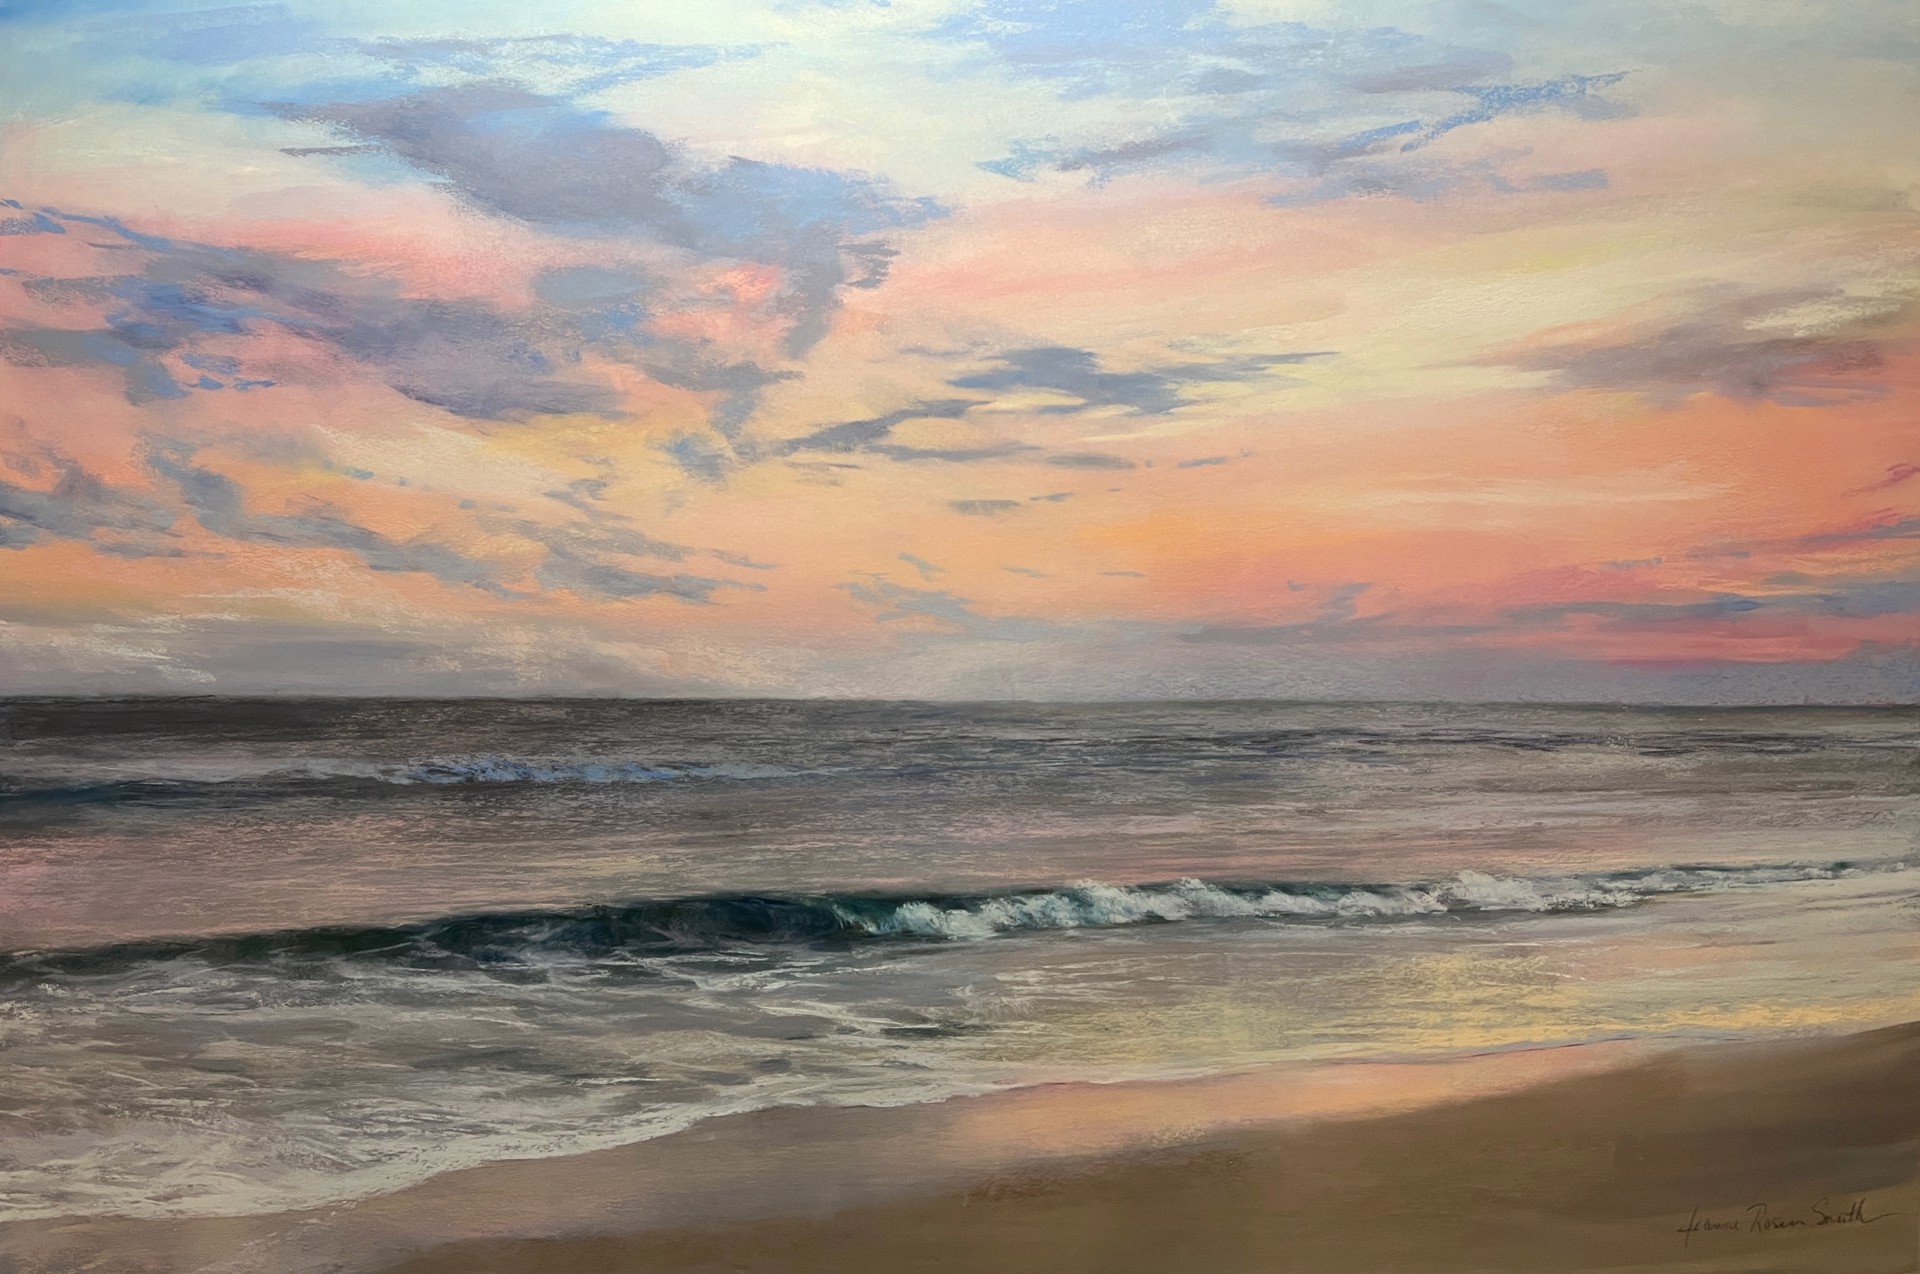 Evening Calm by Jeanne Rosier Smith